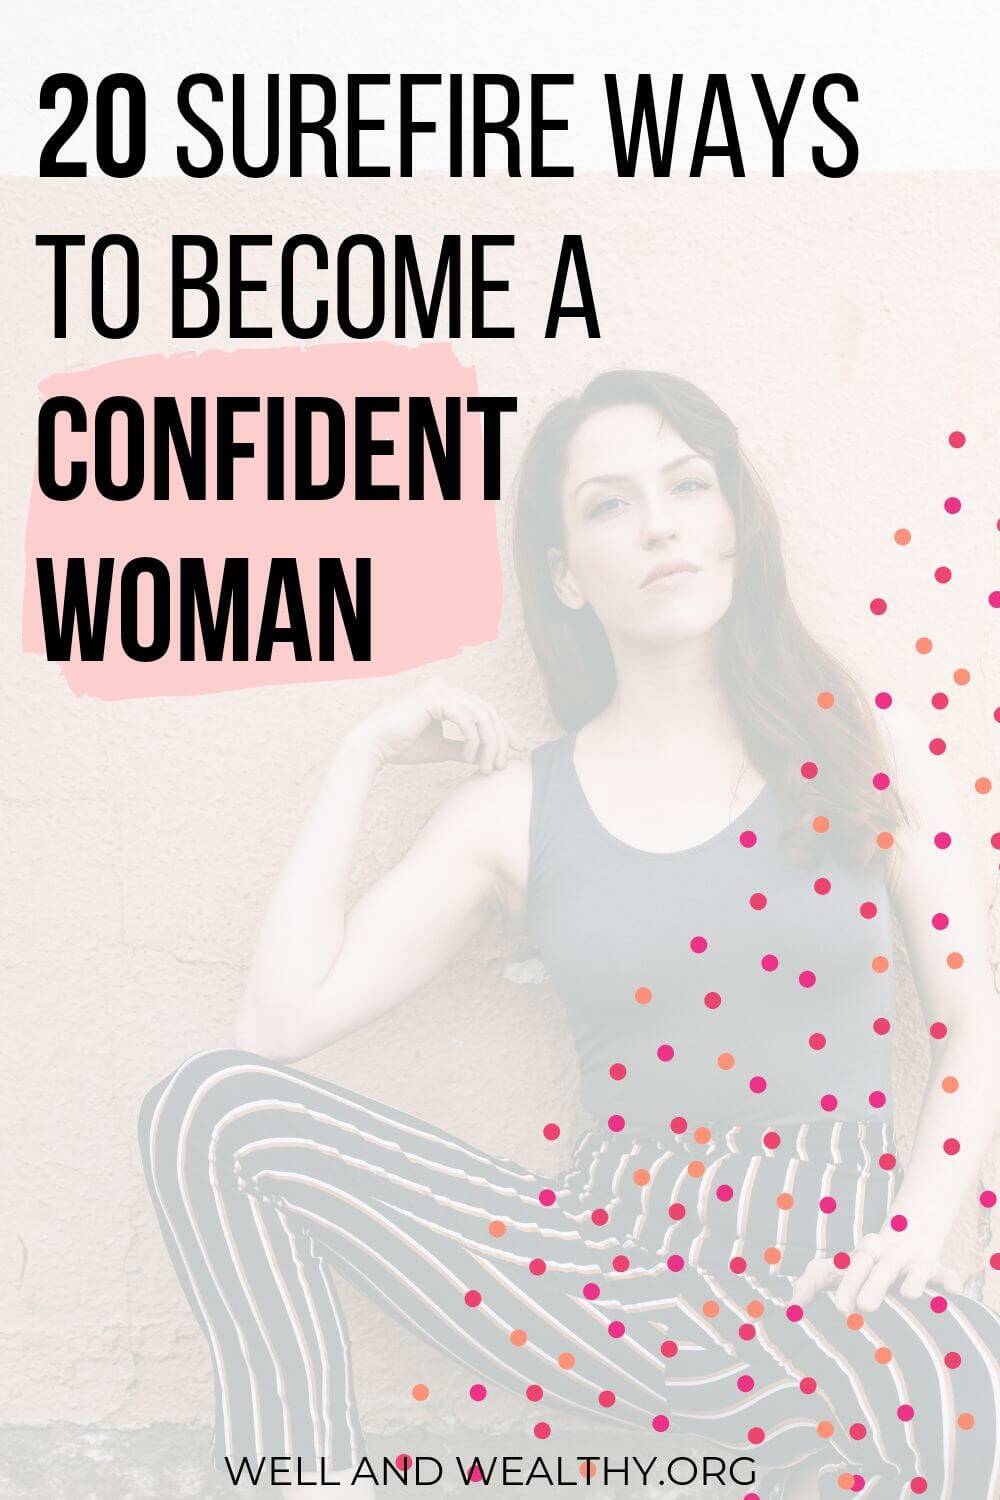 I’ve always wanted to be one of those super confident women who really get what they want in life and the tips and thoughts in this post have been life changing. No longer am I the shy one, now I go for what I want and succeed! #confidence #confident #success